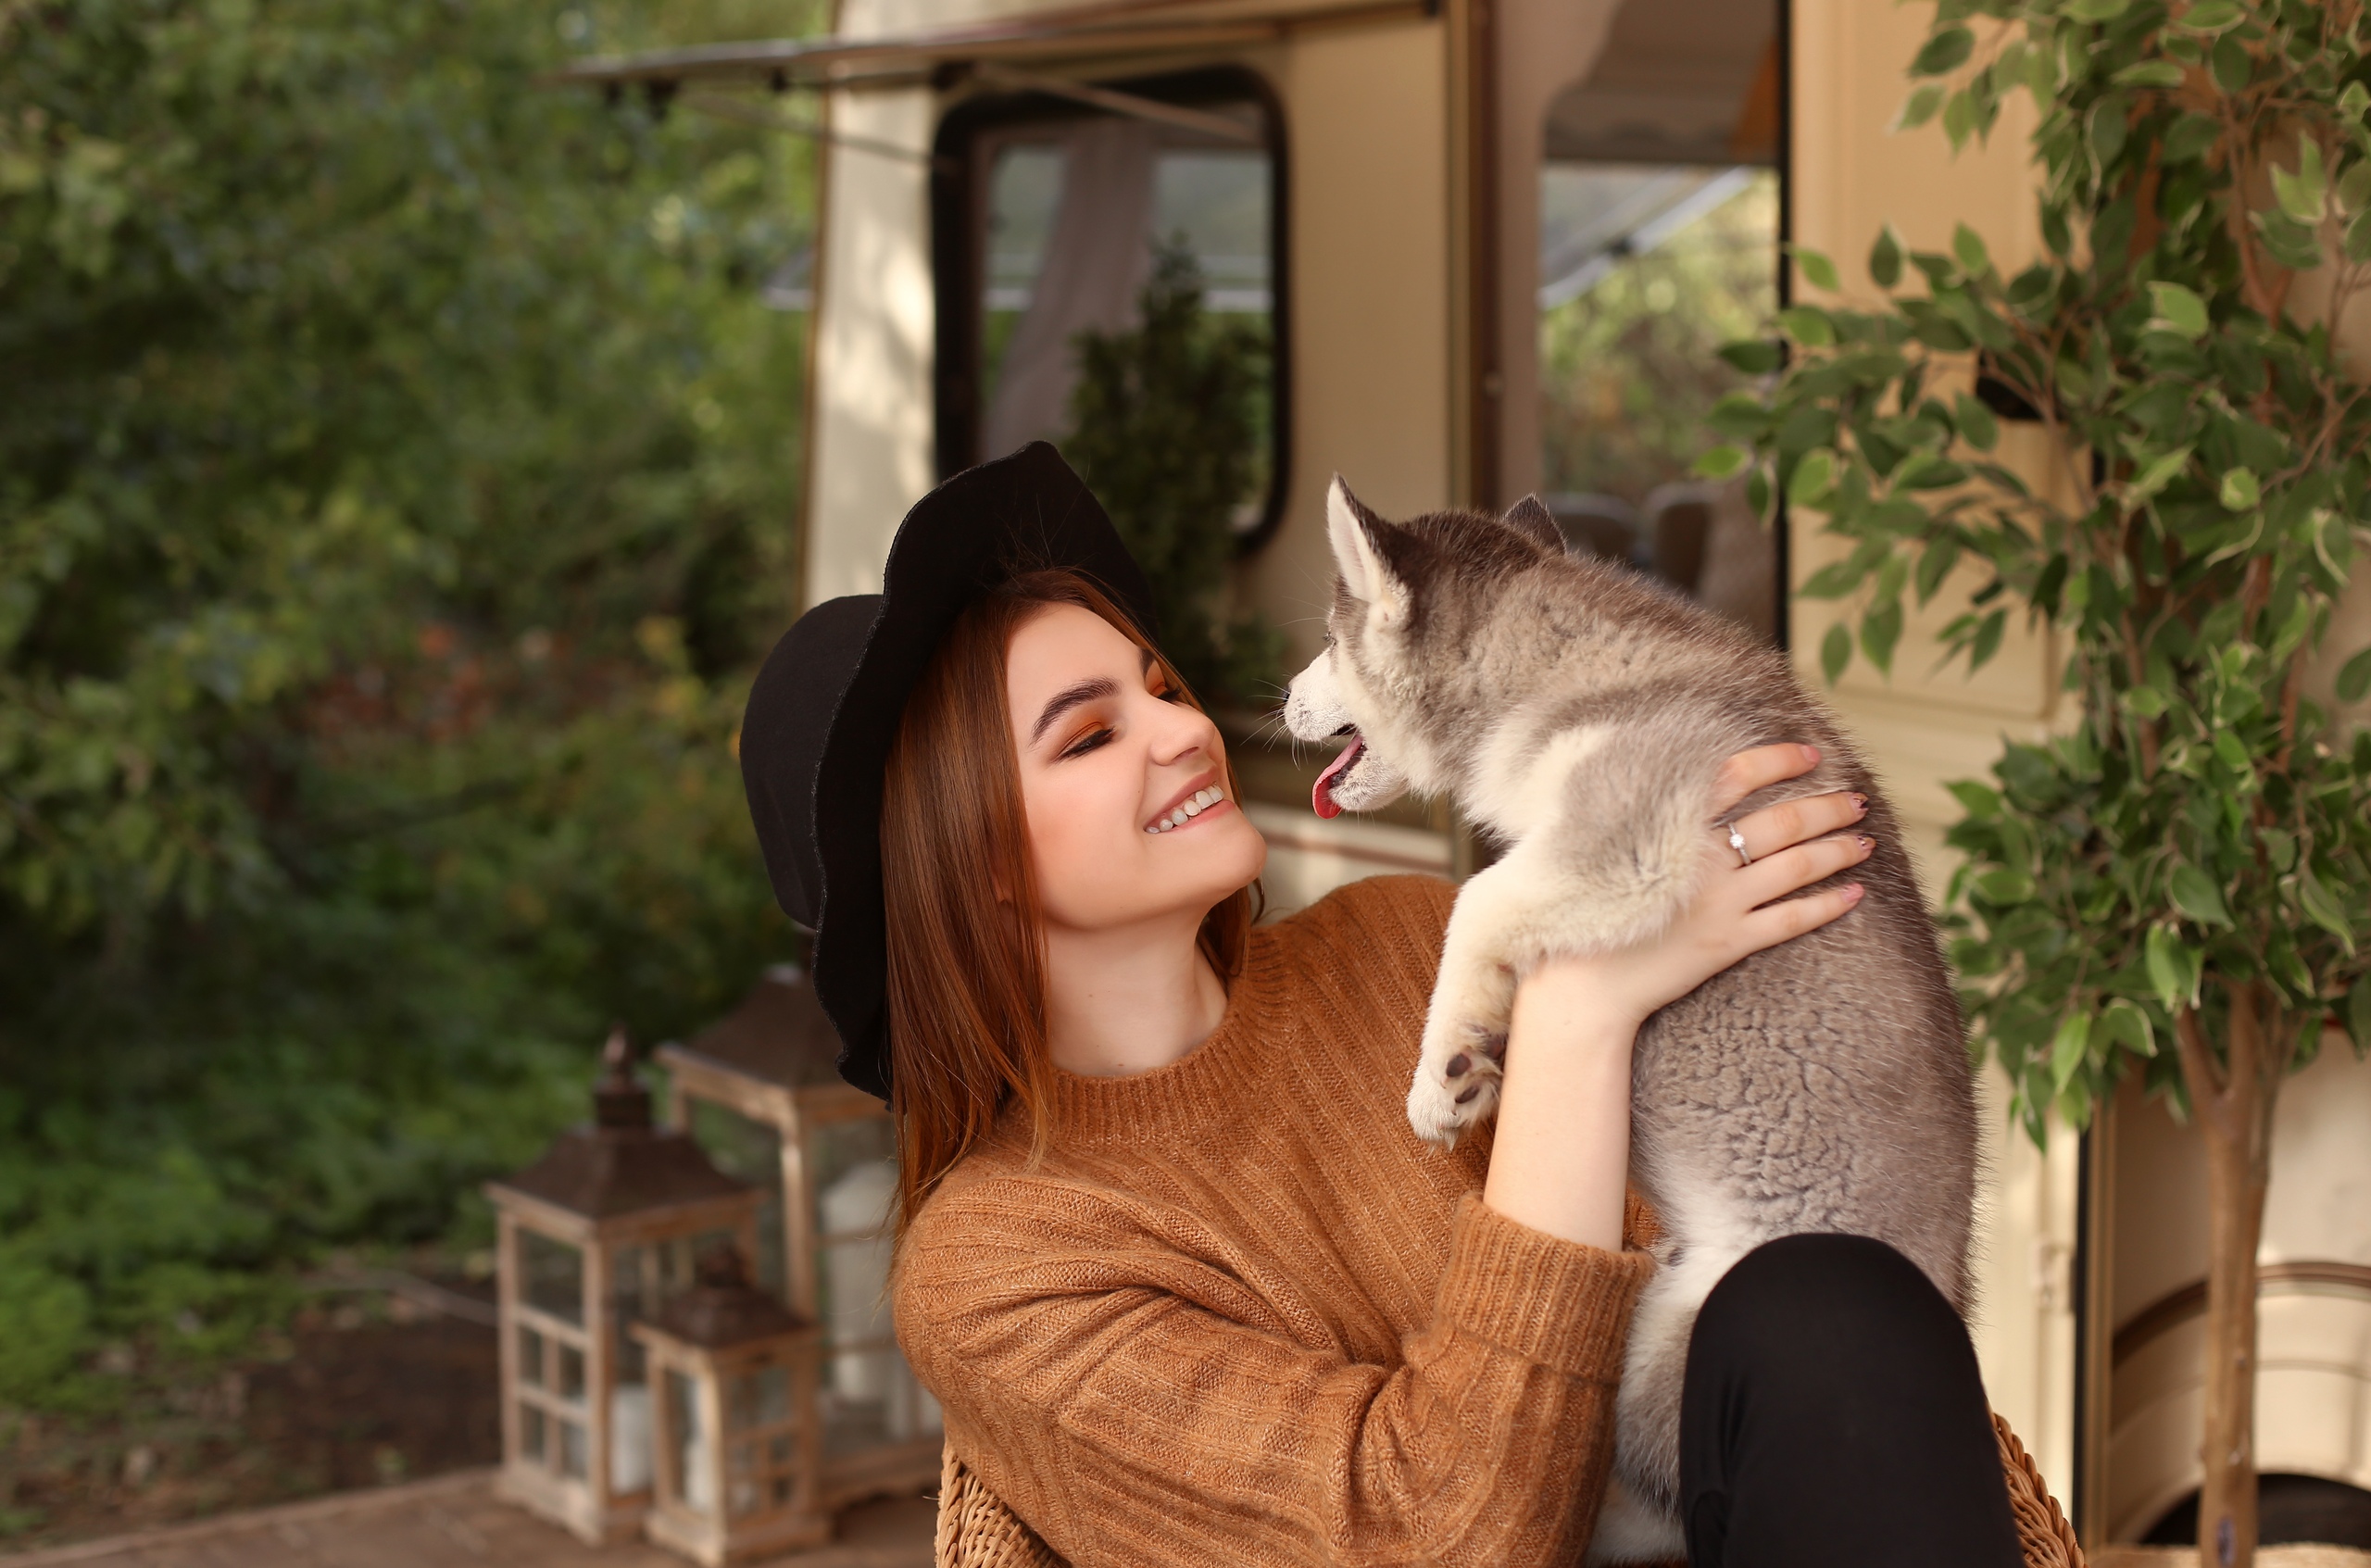 People 2560x1693 women model brunette hat women with hats portrait smiling outdoors depth of field sweater Siberian Husky  dog pet animals women outdoors women with dogs happy black hat brown sweater millinery puppies young women